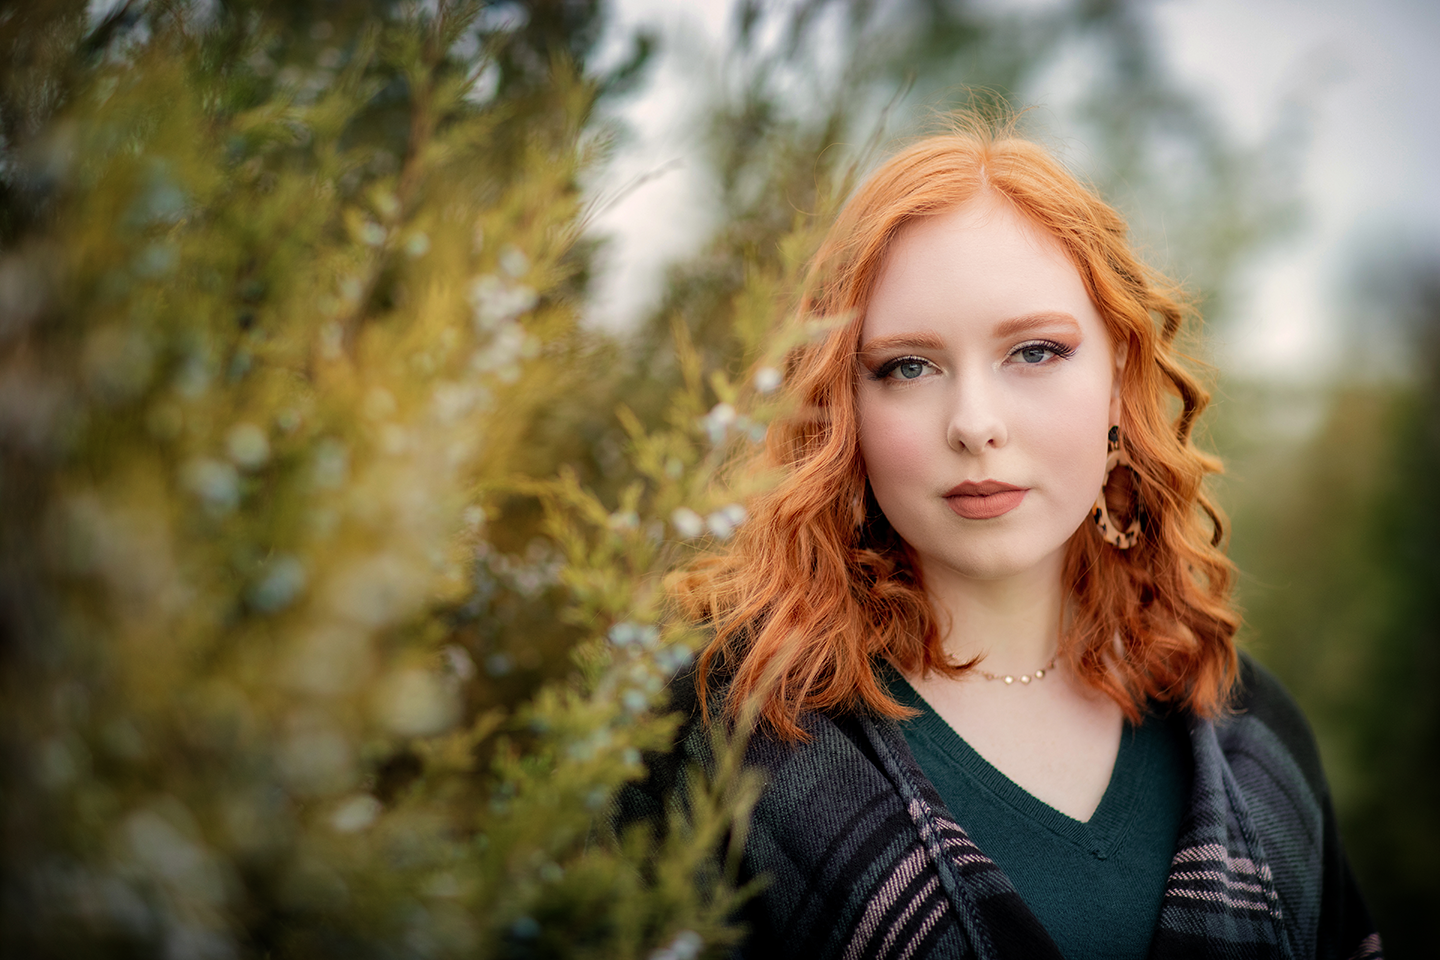 Picture of high school senior with red hair, green shirt.